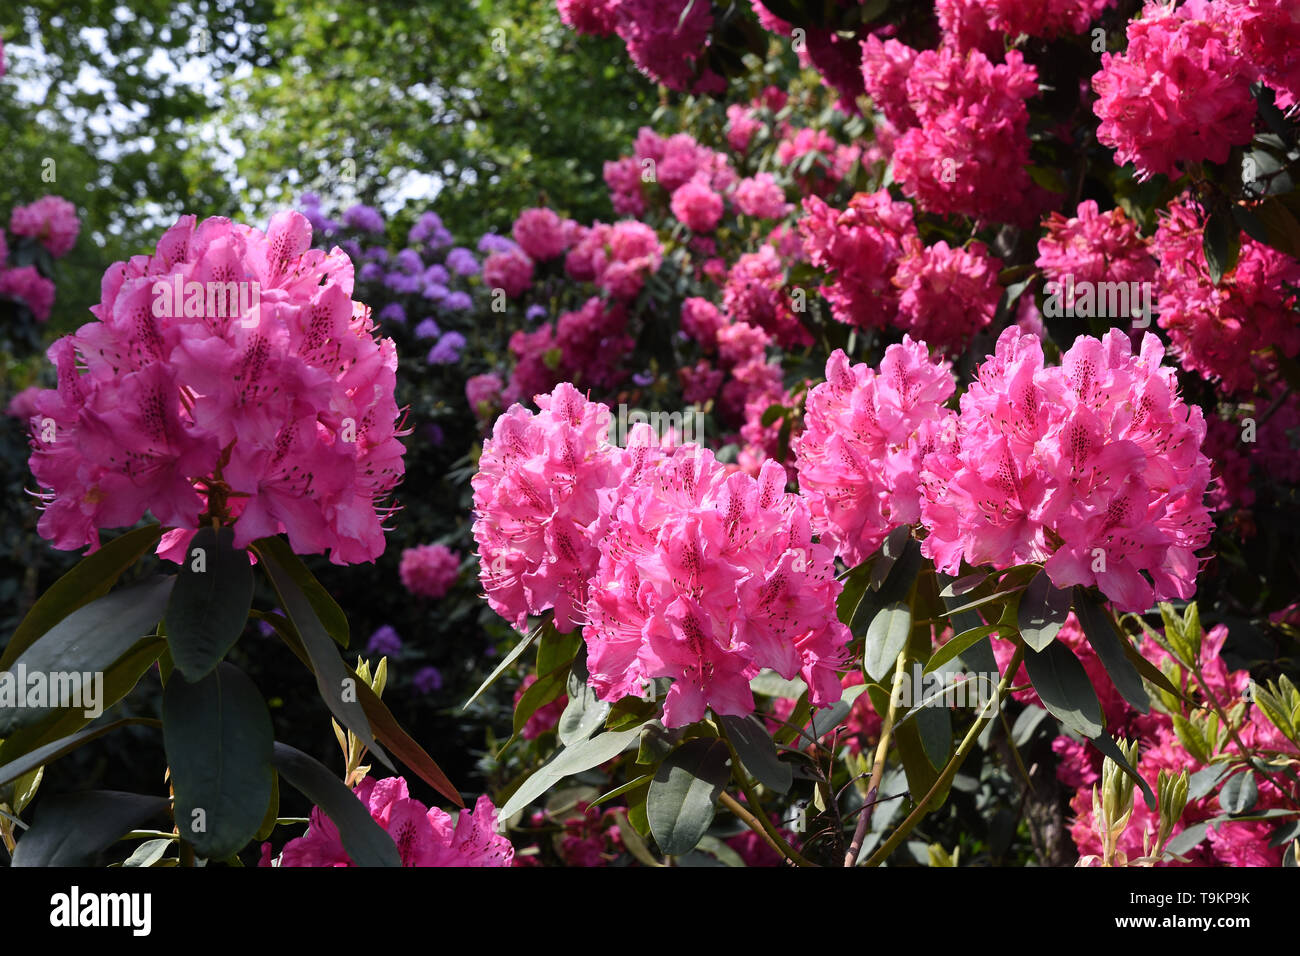 Rhododendrons, Kenwood, Hampstead Heath, Londres Banque D'Images